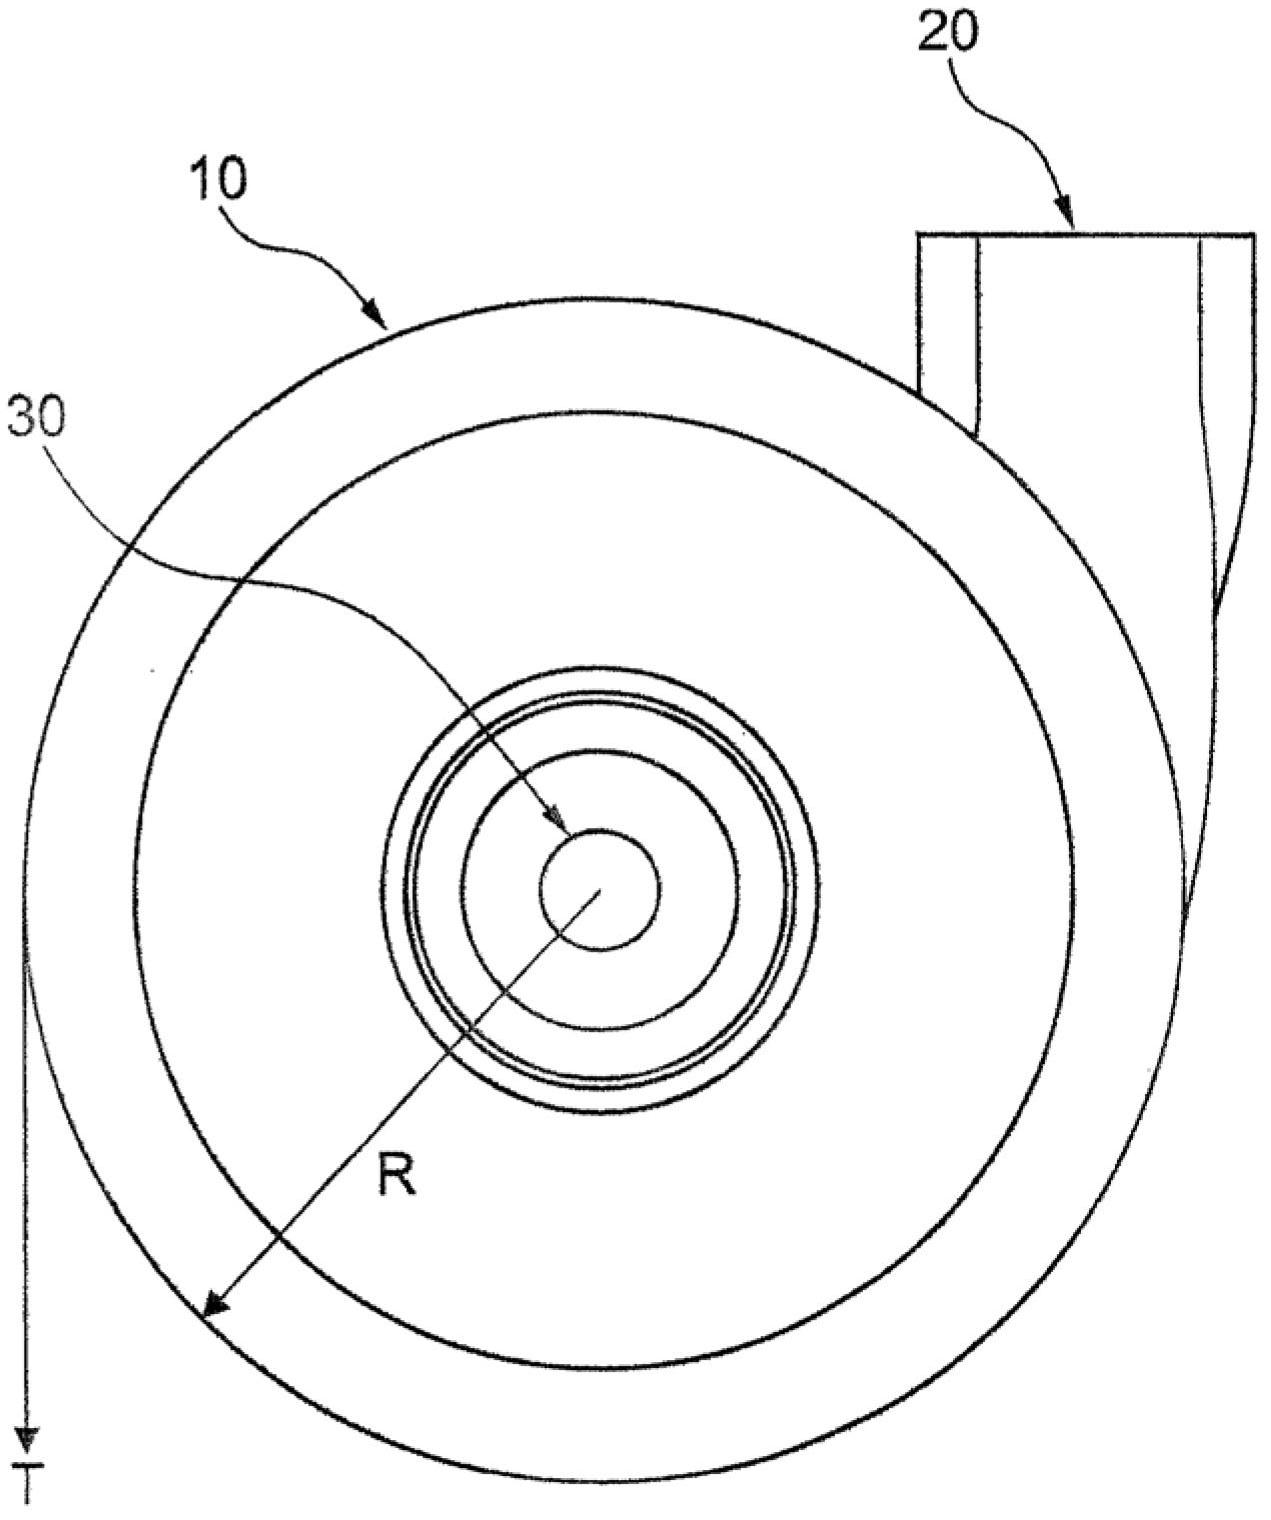 Patient ventilation device and components thereof